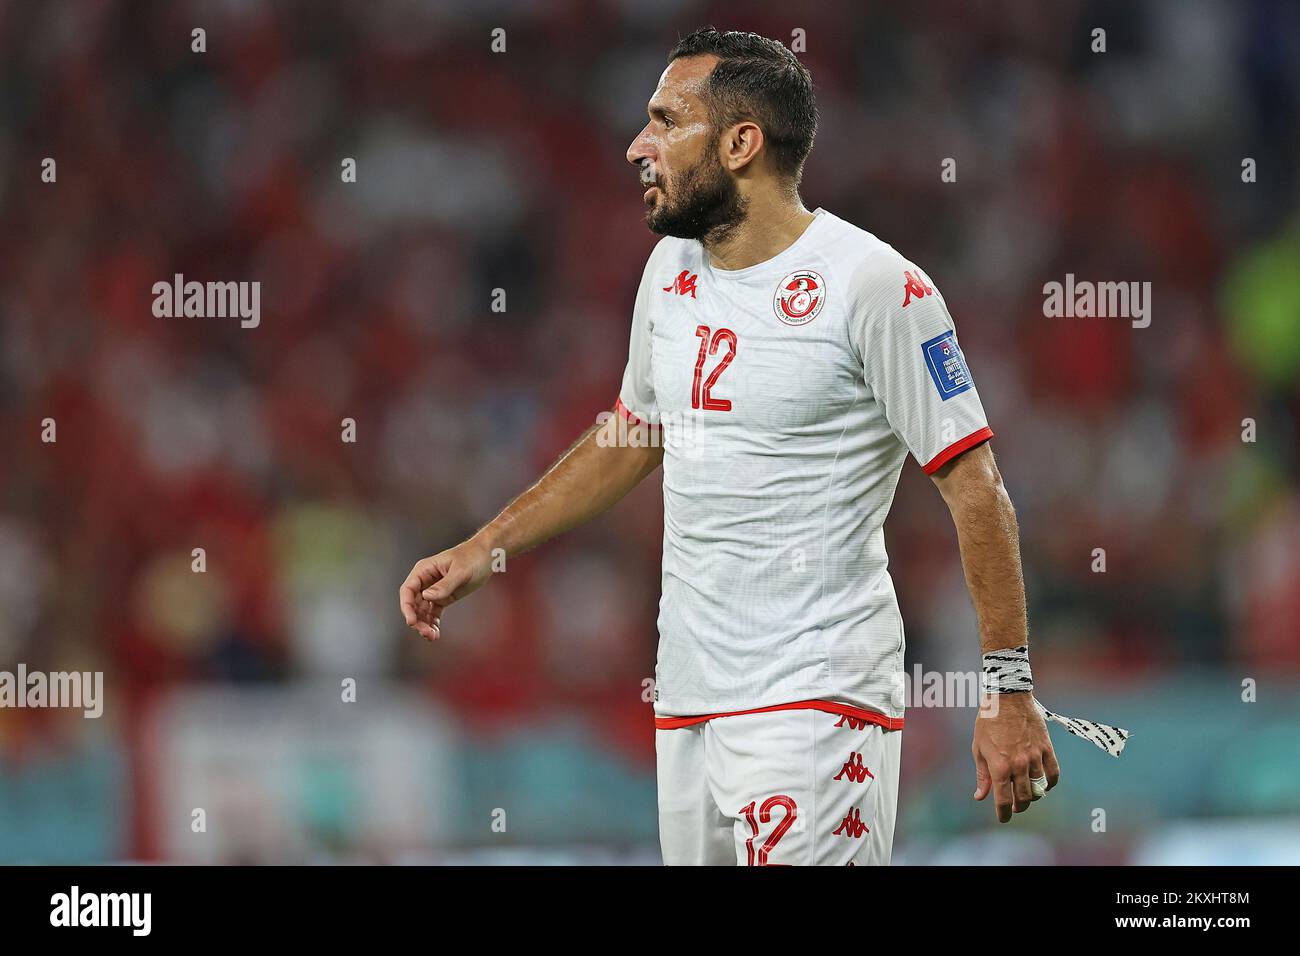 Doha, Qatar. 30th Nov, 2022. Ali Maaloul of Tunisia, during the match between Tunisia and France, for the 3rd round of Group D of the FIFA World Cup Qatar 2022, Education City Stadium this Wednesday 30. 30761 (Heuler Andrey/SPP) Credit: SPP Sport Press Photo. /Alamy Live News Stock Photo